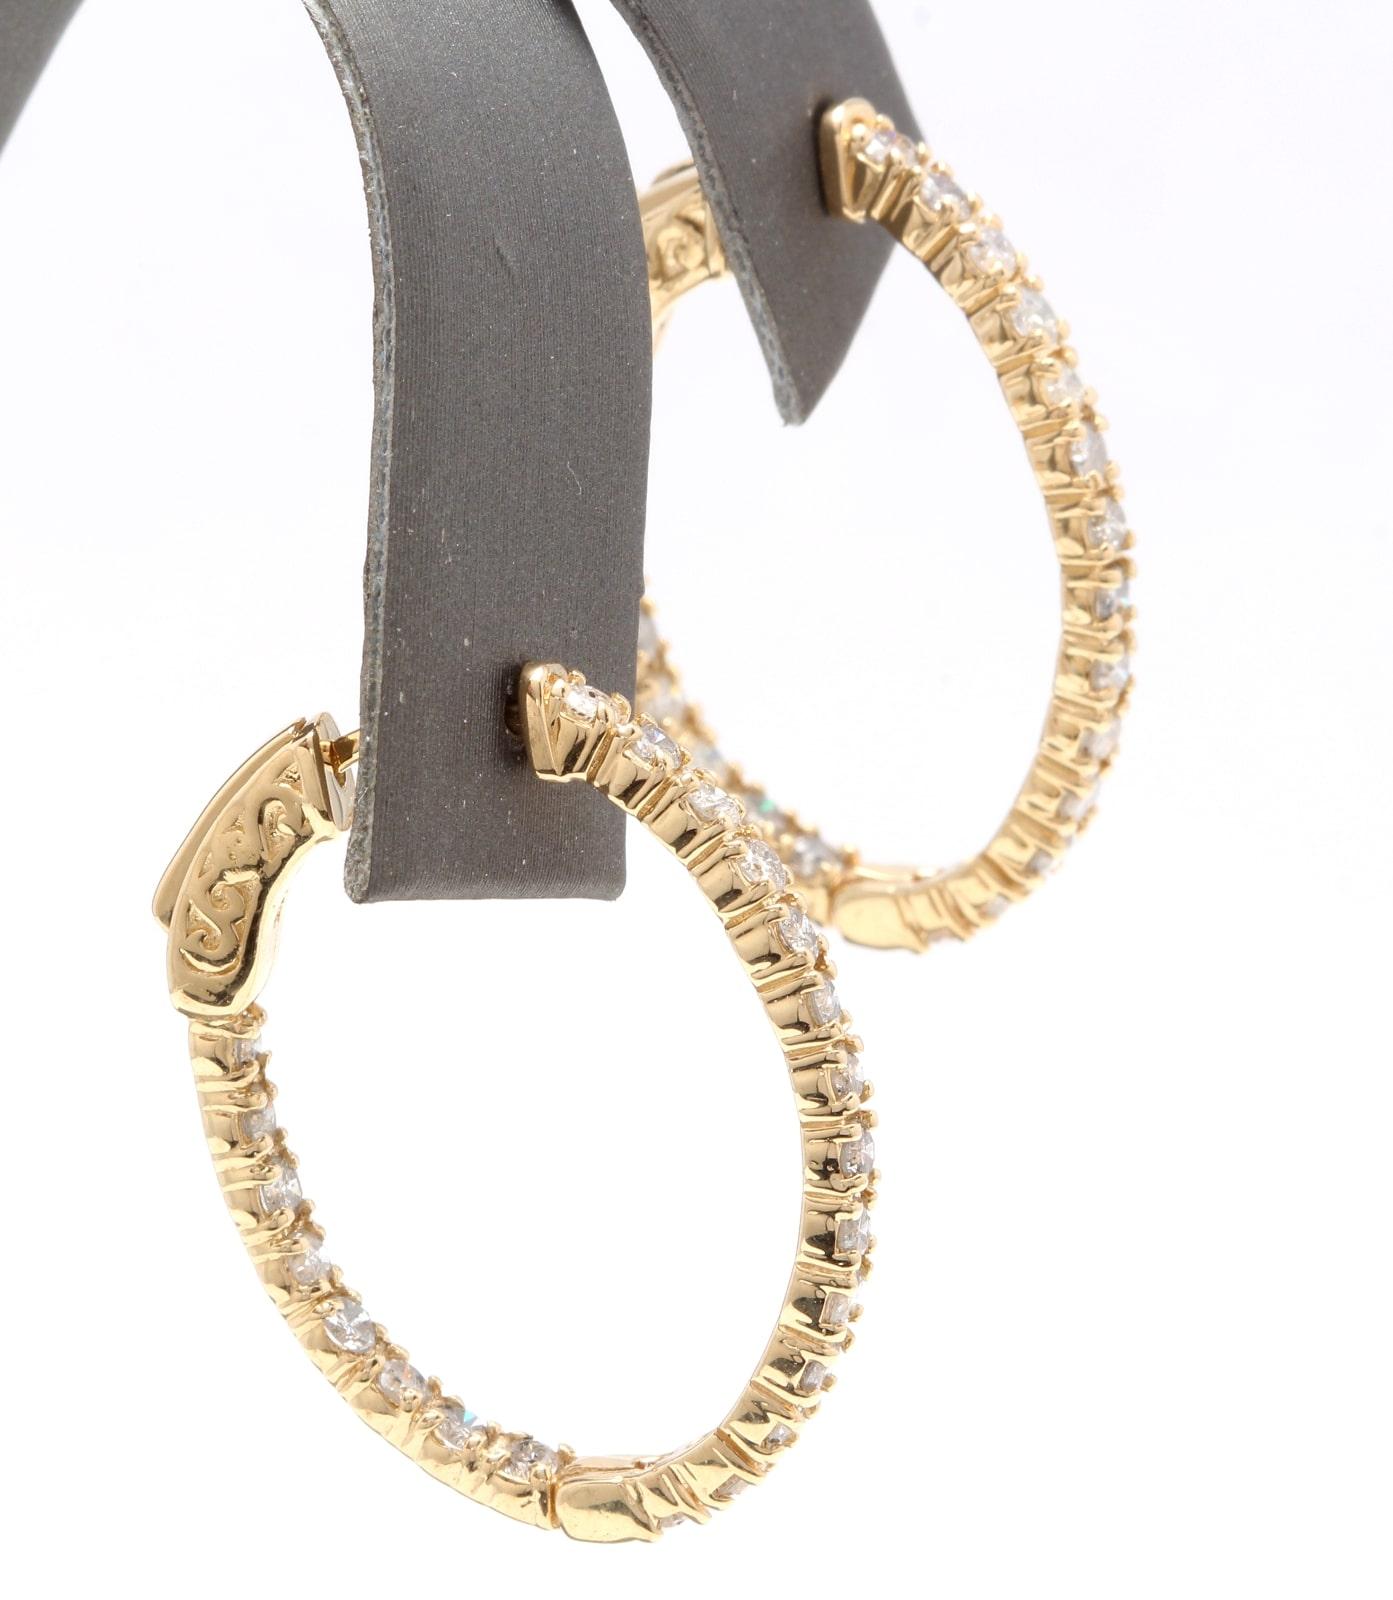 Round Cut Exquisite 2.25 Carat Natural Diamond 14 Karat Solid Yellow Gold Hoop Earrings For Sale